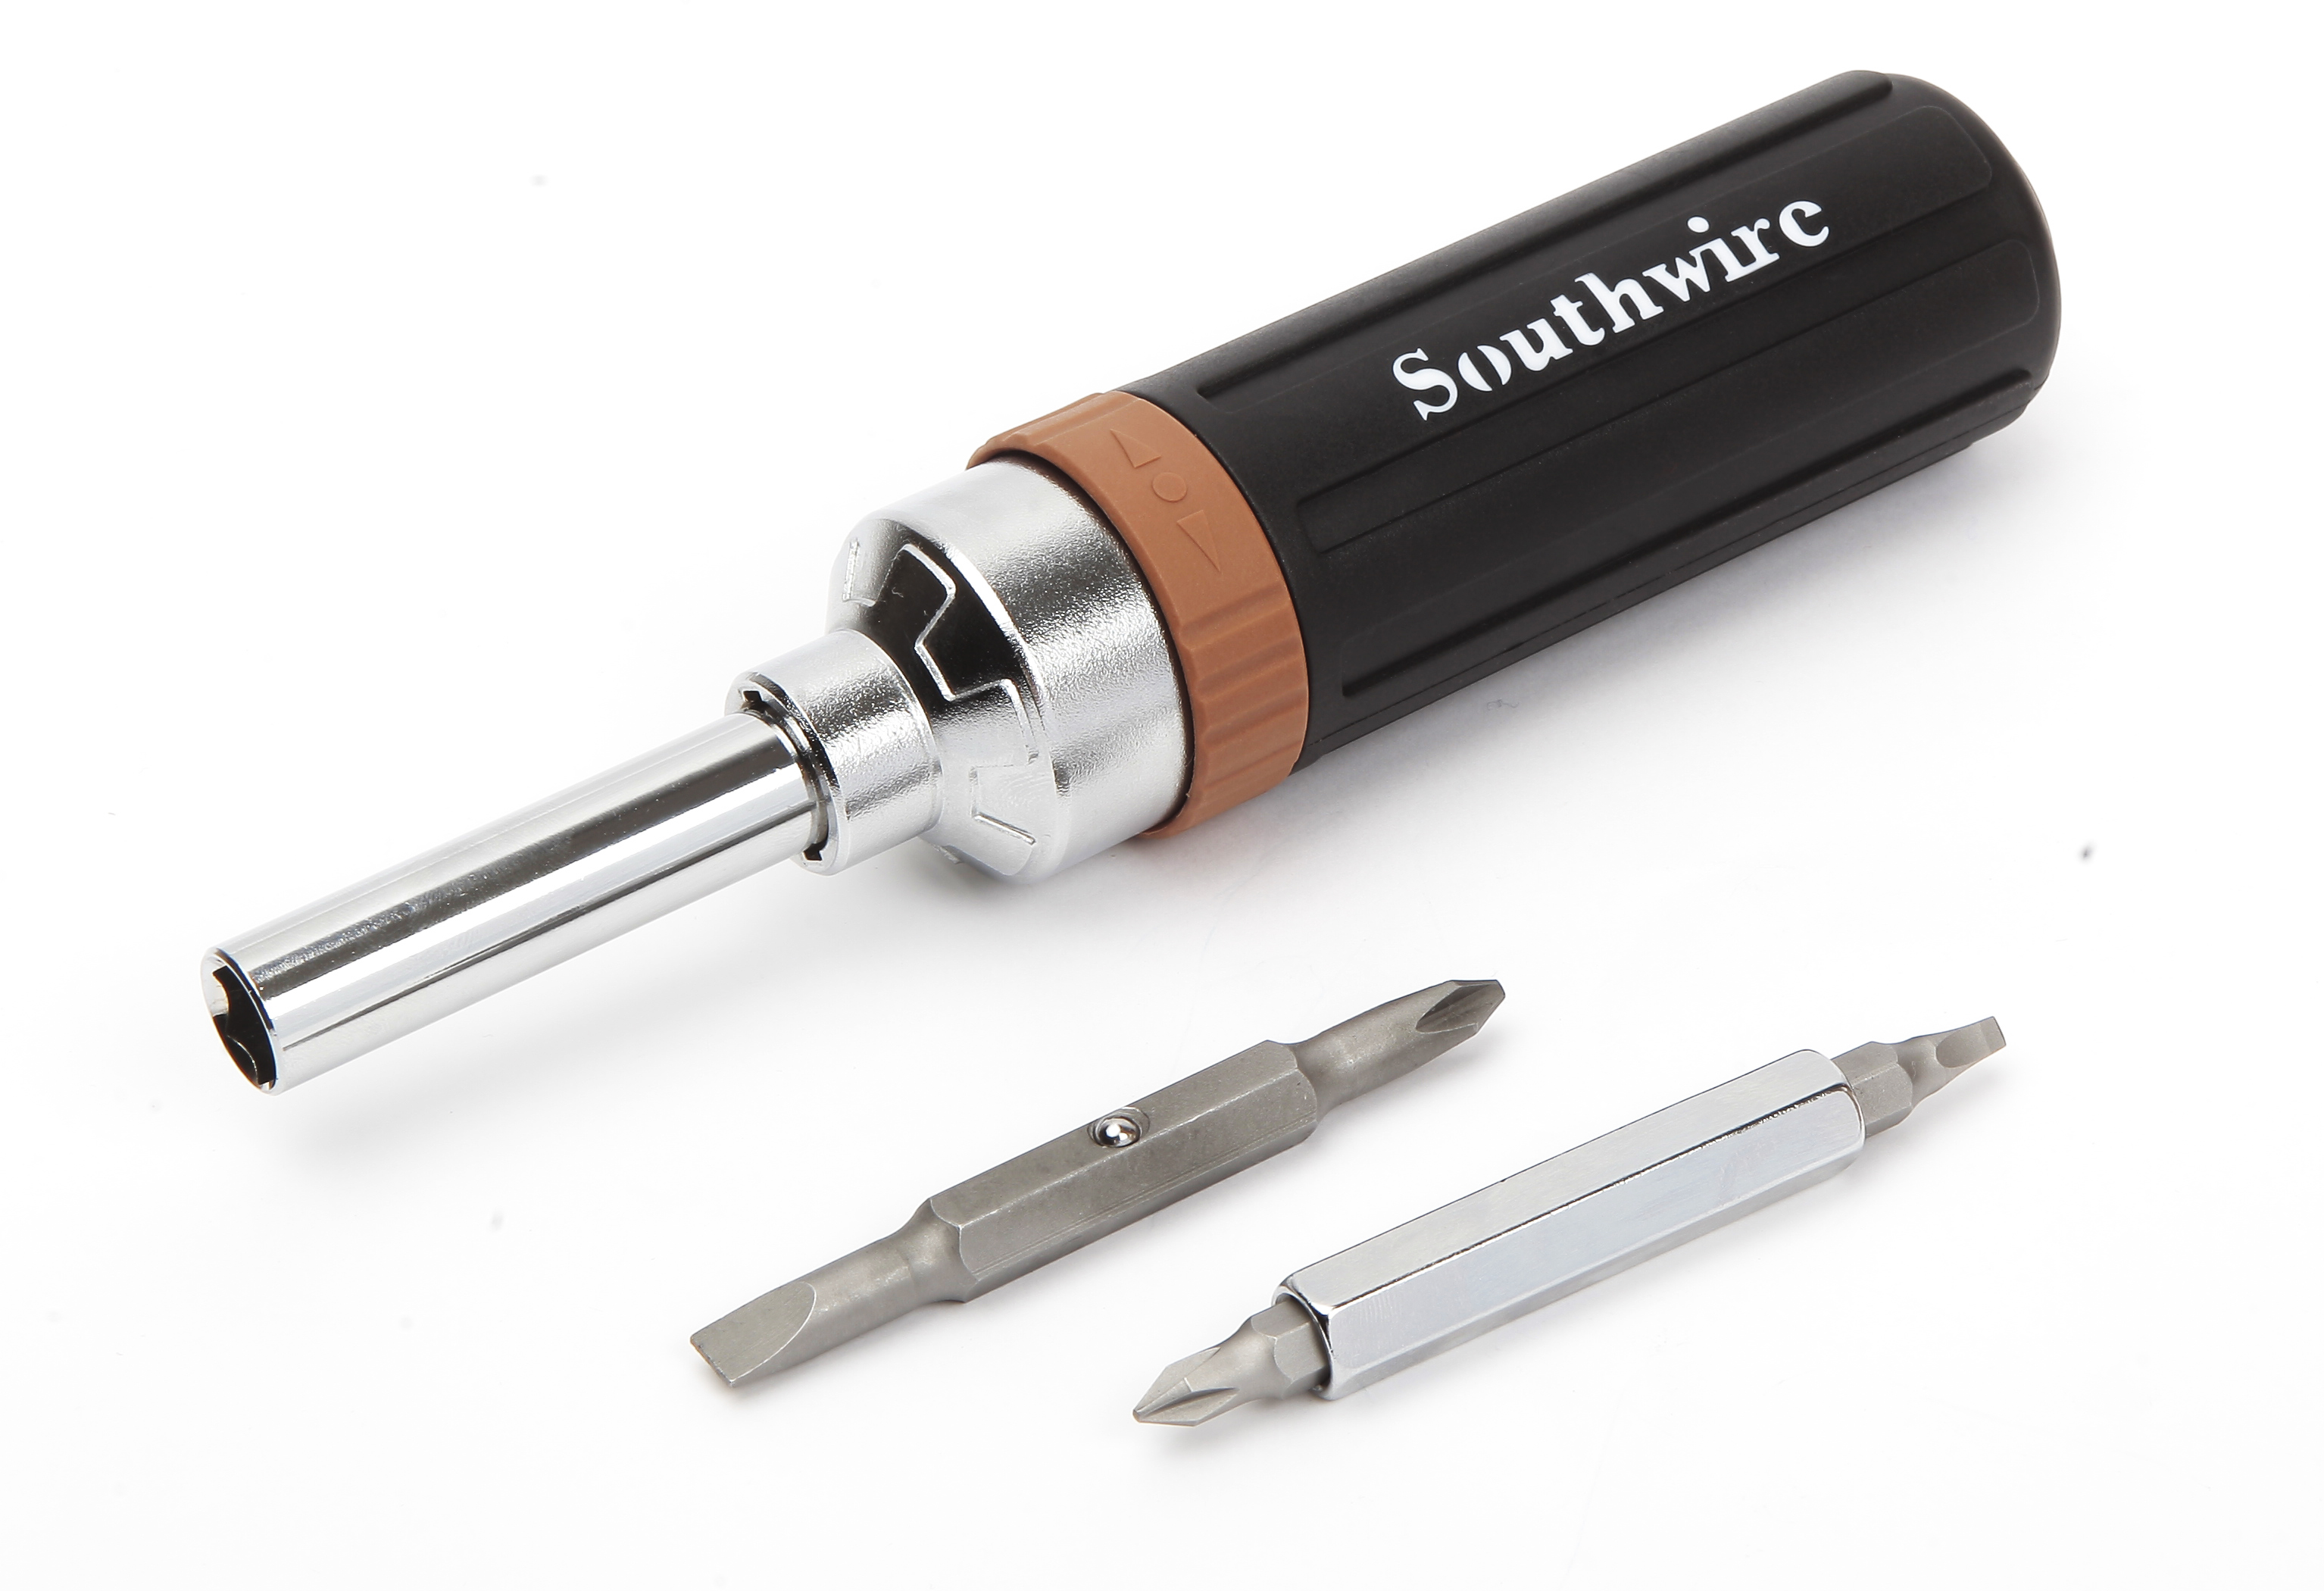 Our screwdrivers are designed from the highest quality tempered steel and are manufactured to ensure that they fit screw openings precisely.